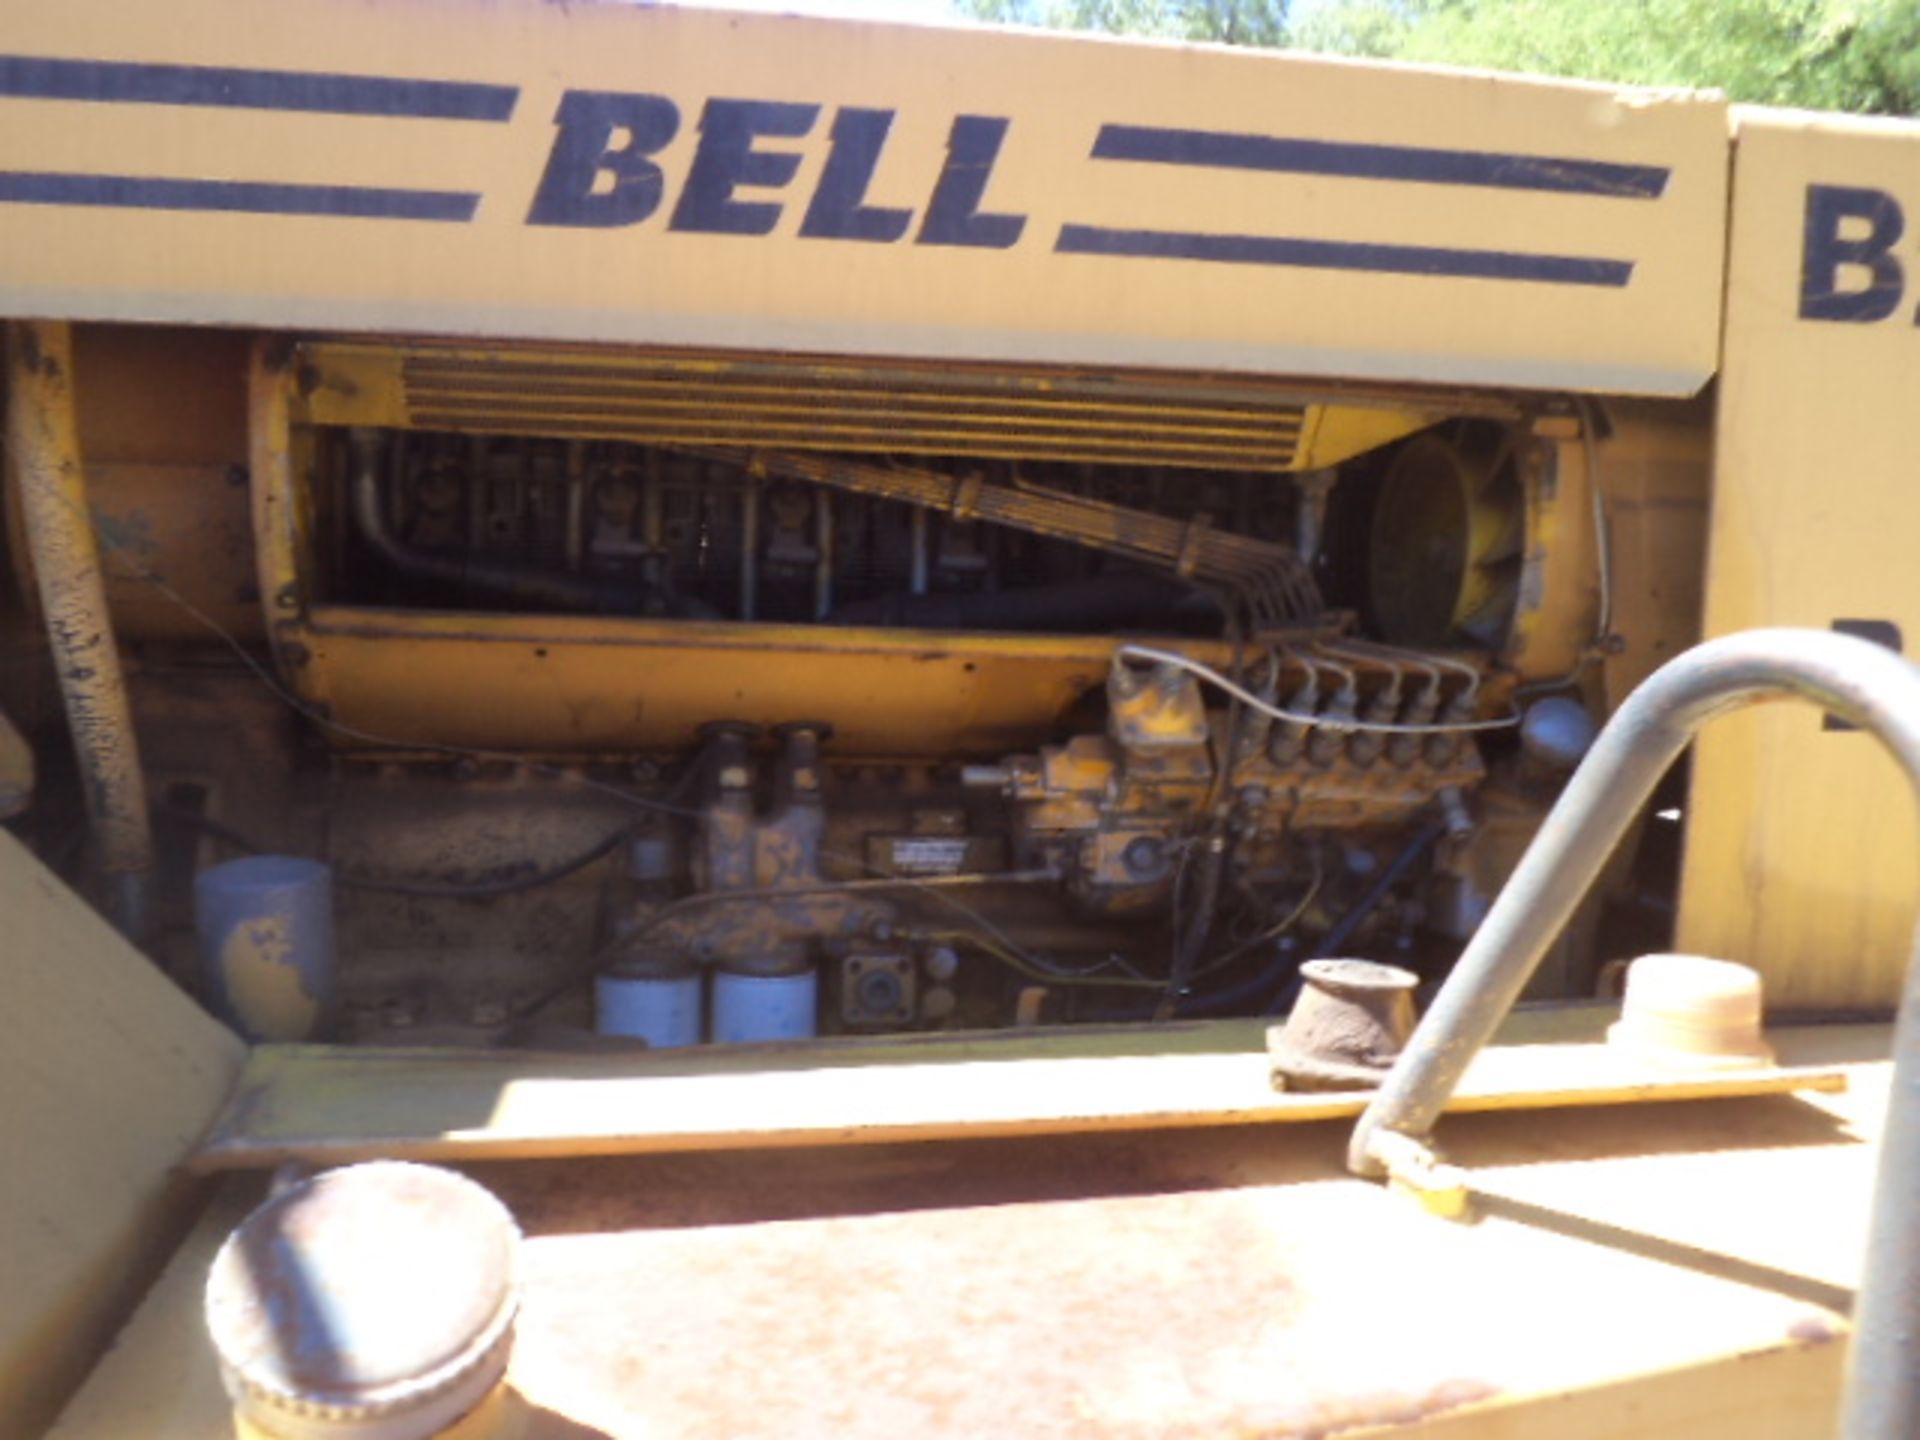 BELL B25 DUMPER TRUCK 56777 HRS (NON RUNNER) (COMPLETE 407 ADE TURBO ENGINE TO BE FITTED)
(8 FULLER - Image 7 of 8